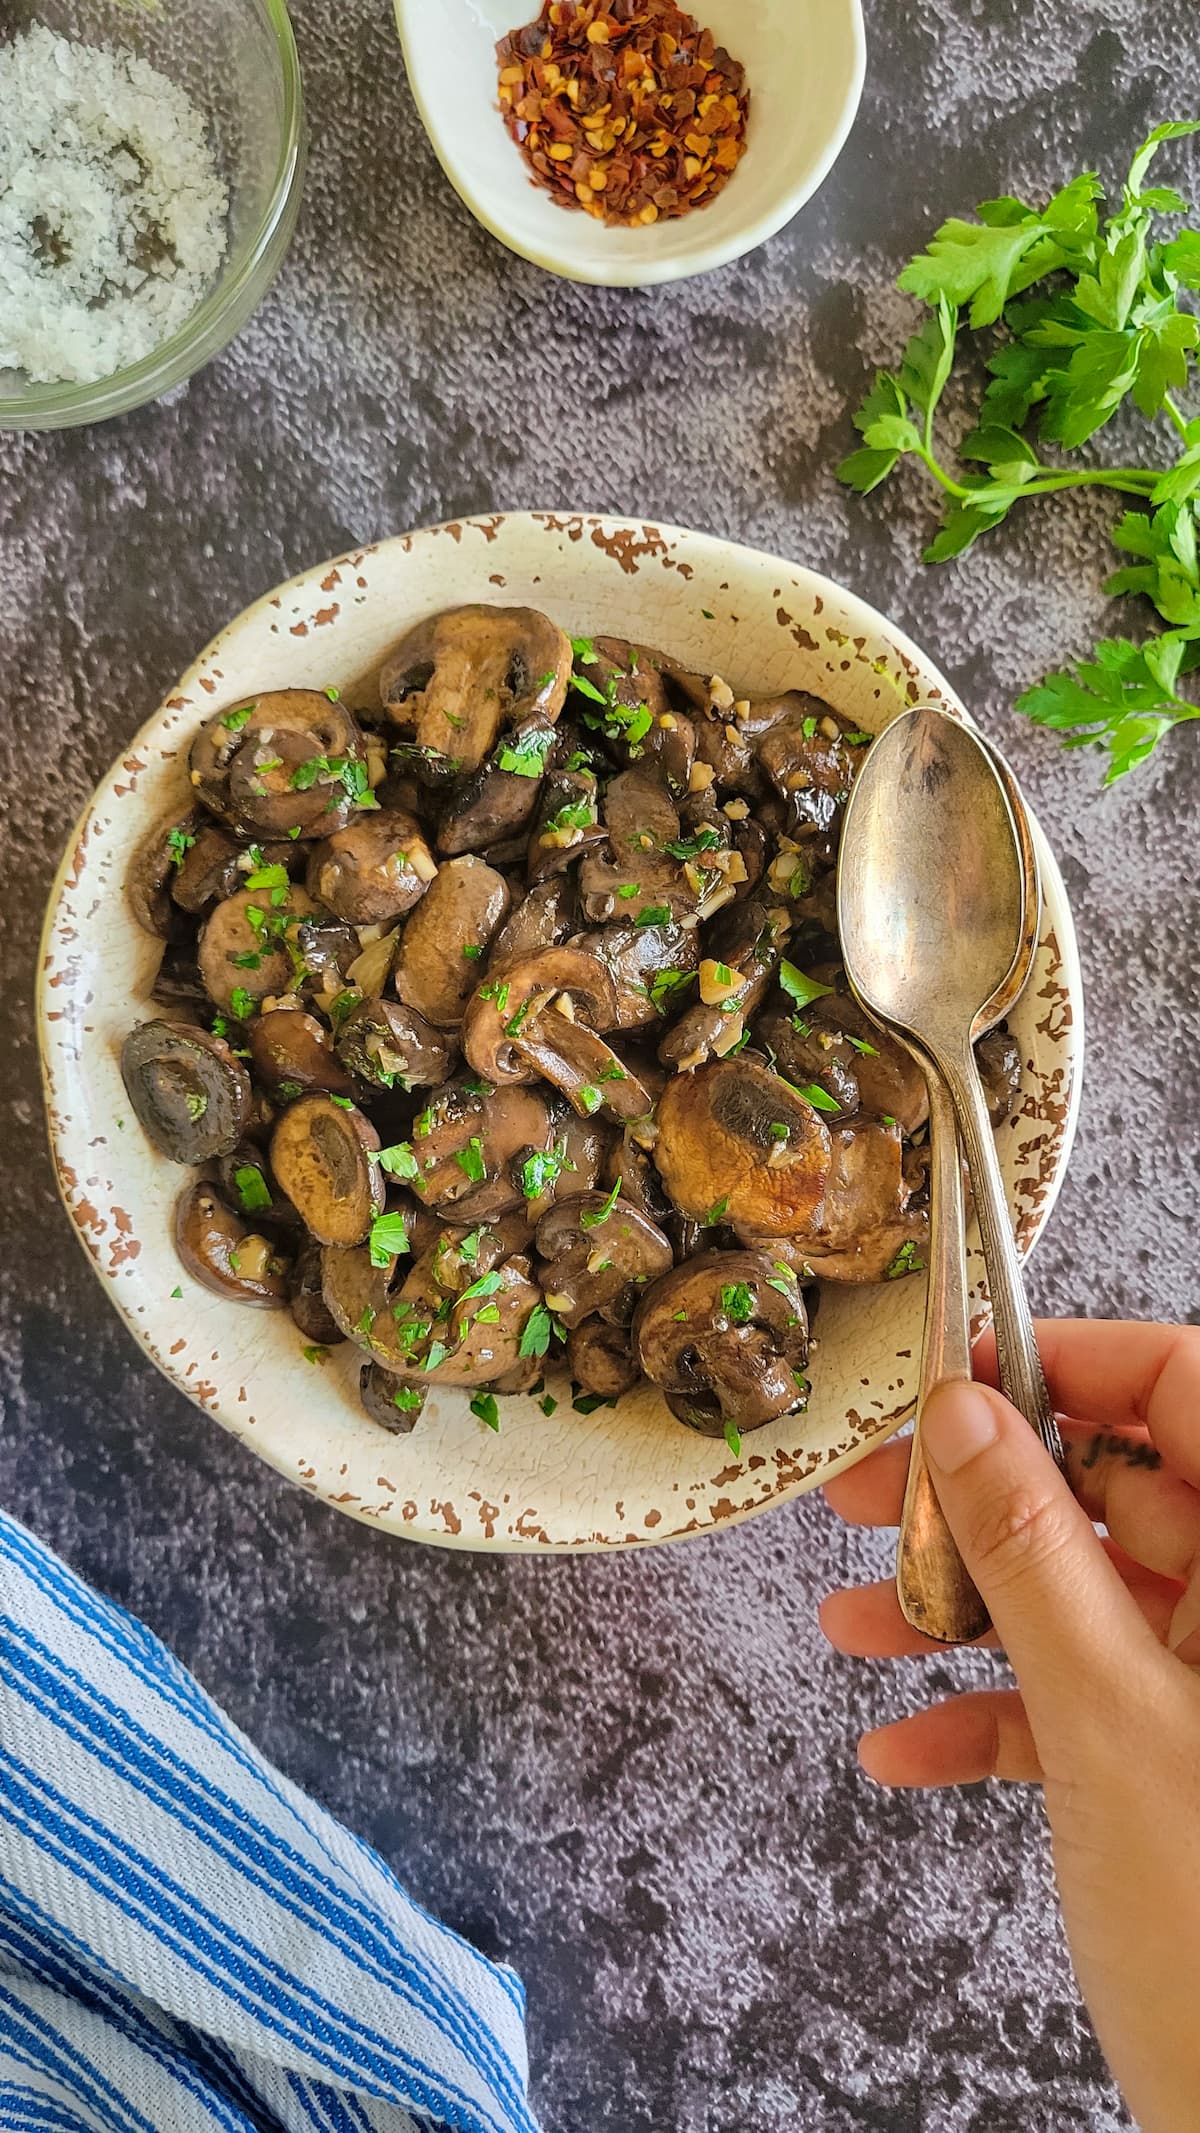 cooked sliced mushrooms with garlic and chopped parsley in a bowl with two spoons, hand on the spoons, chili flakes, salt and herbs in the background